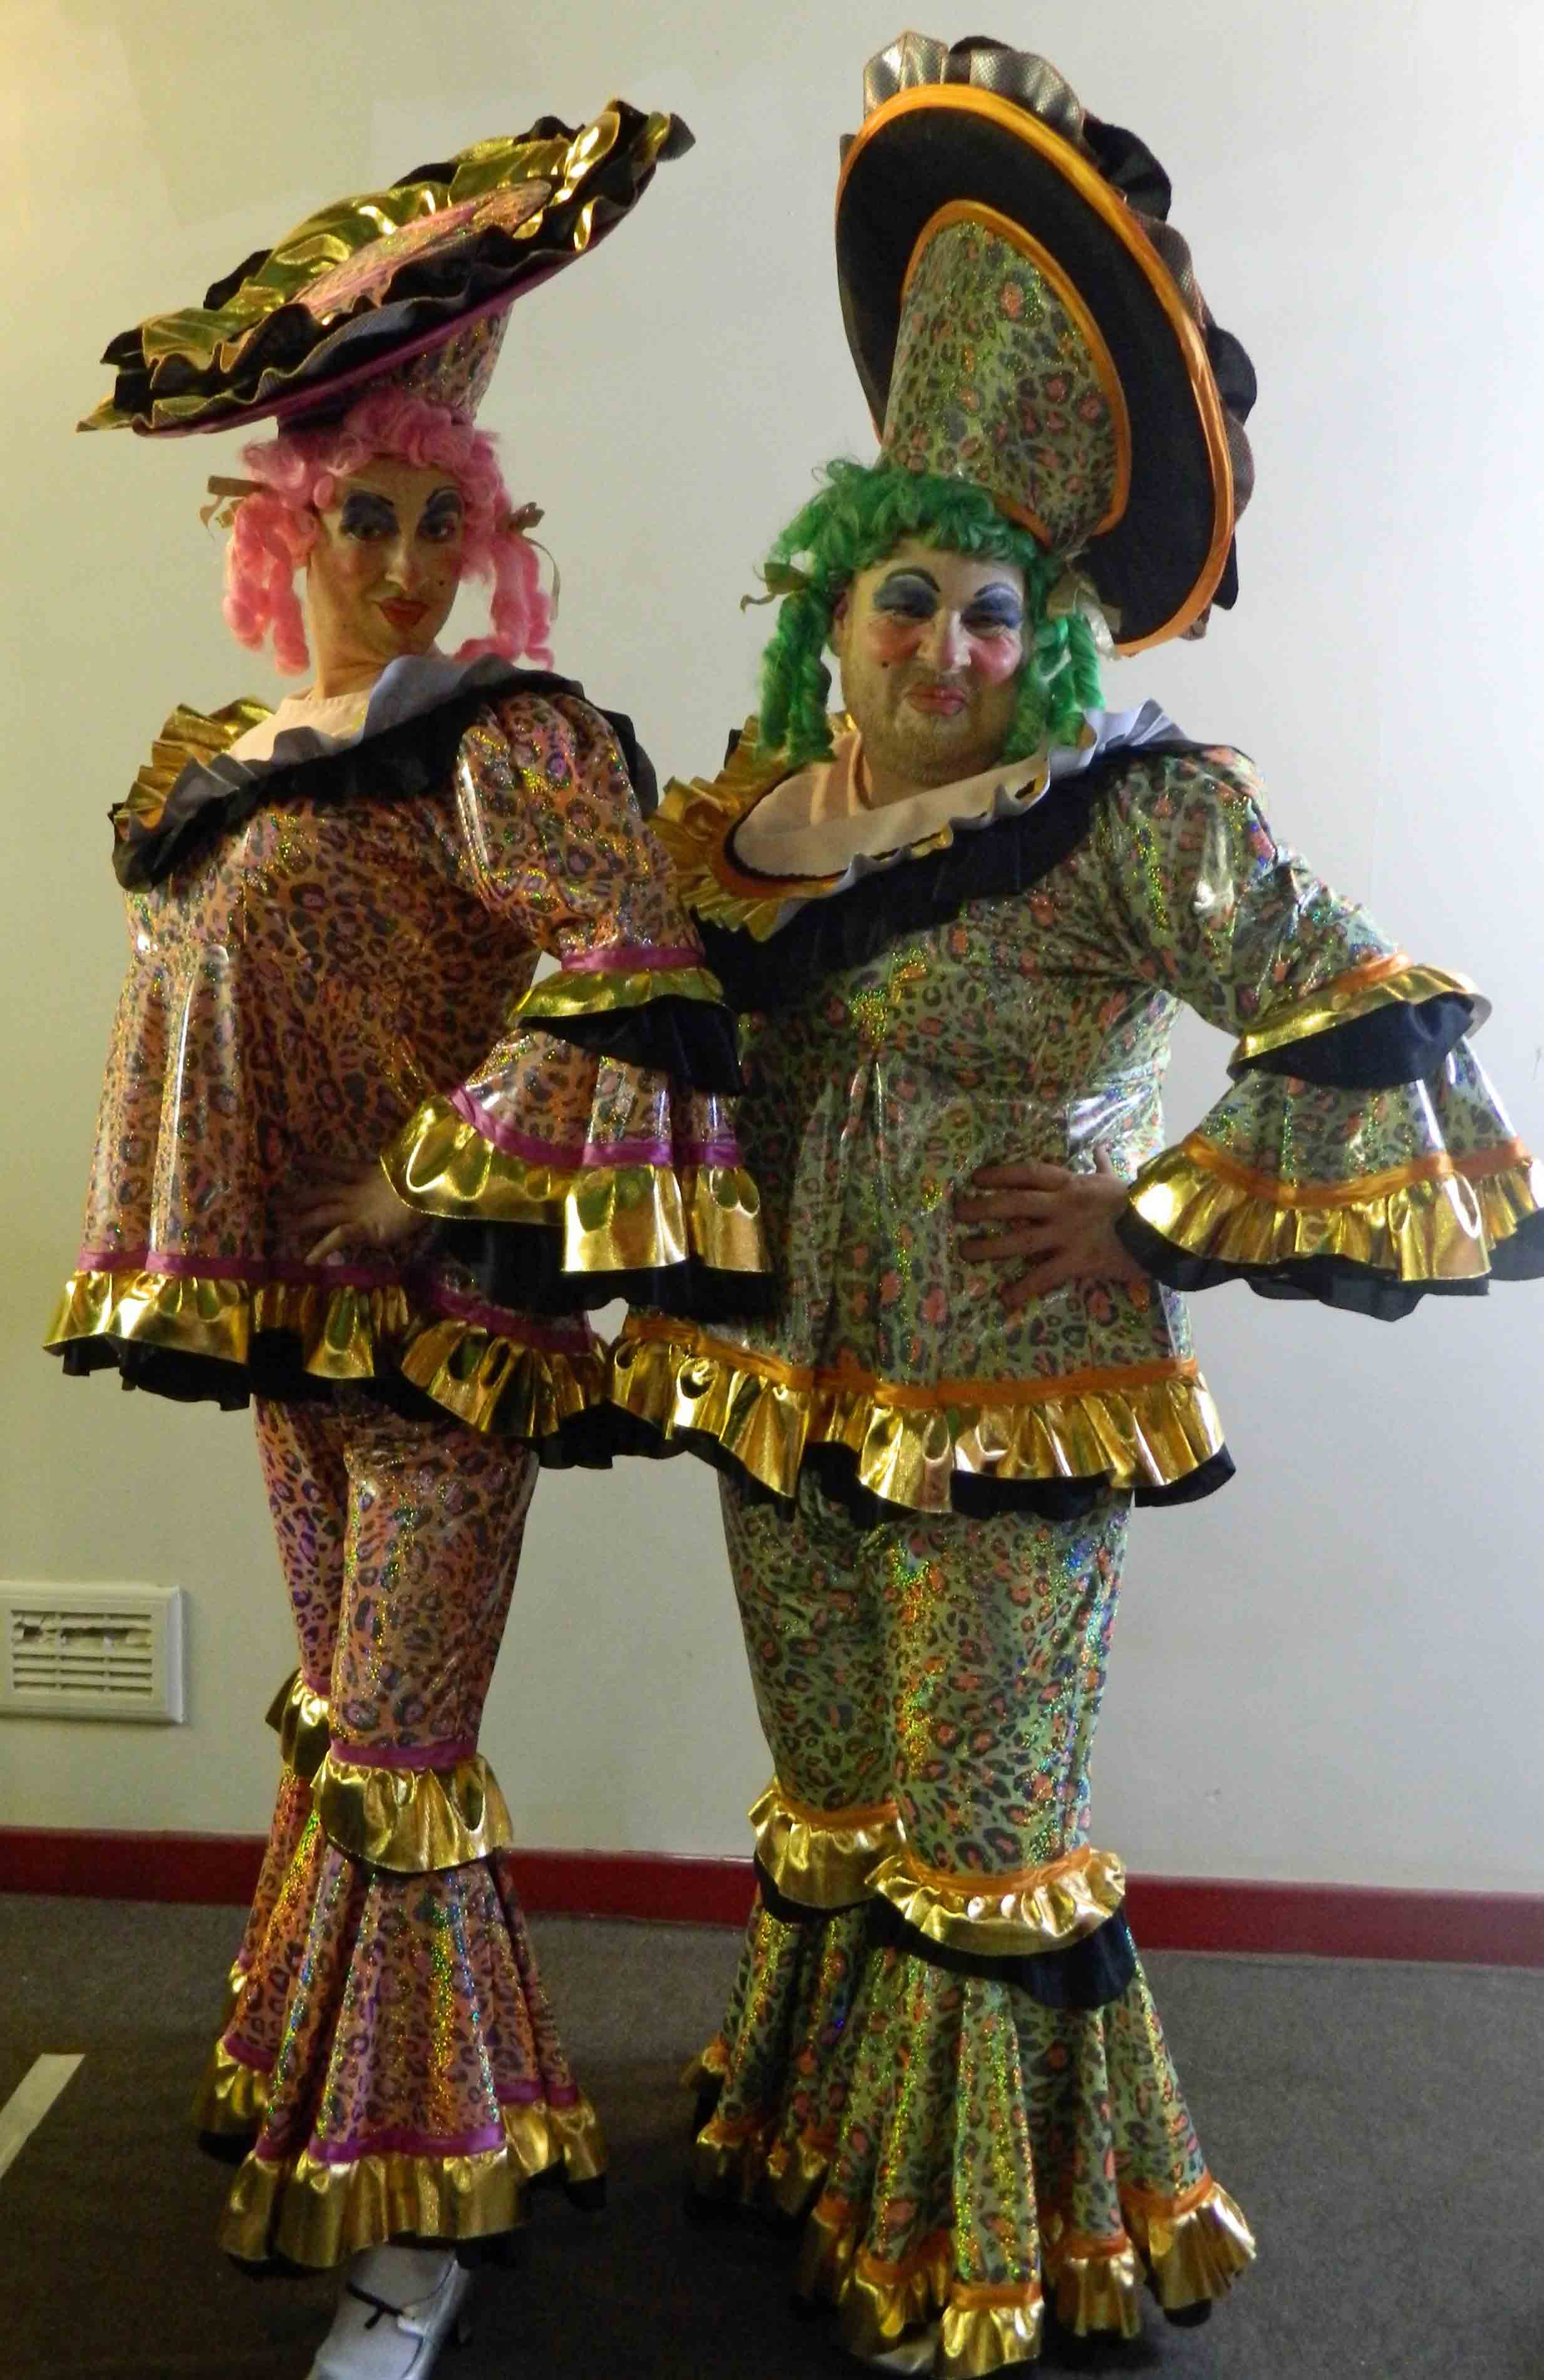 Ugly Sister Pantomime Dame Costumes for Hire UK2465 x 3799